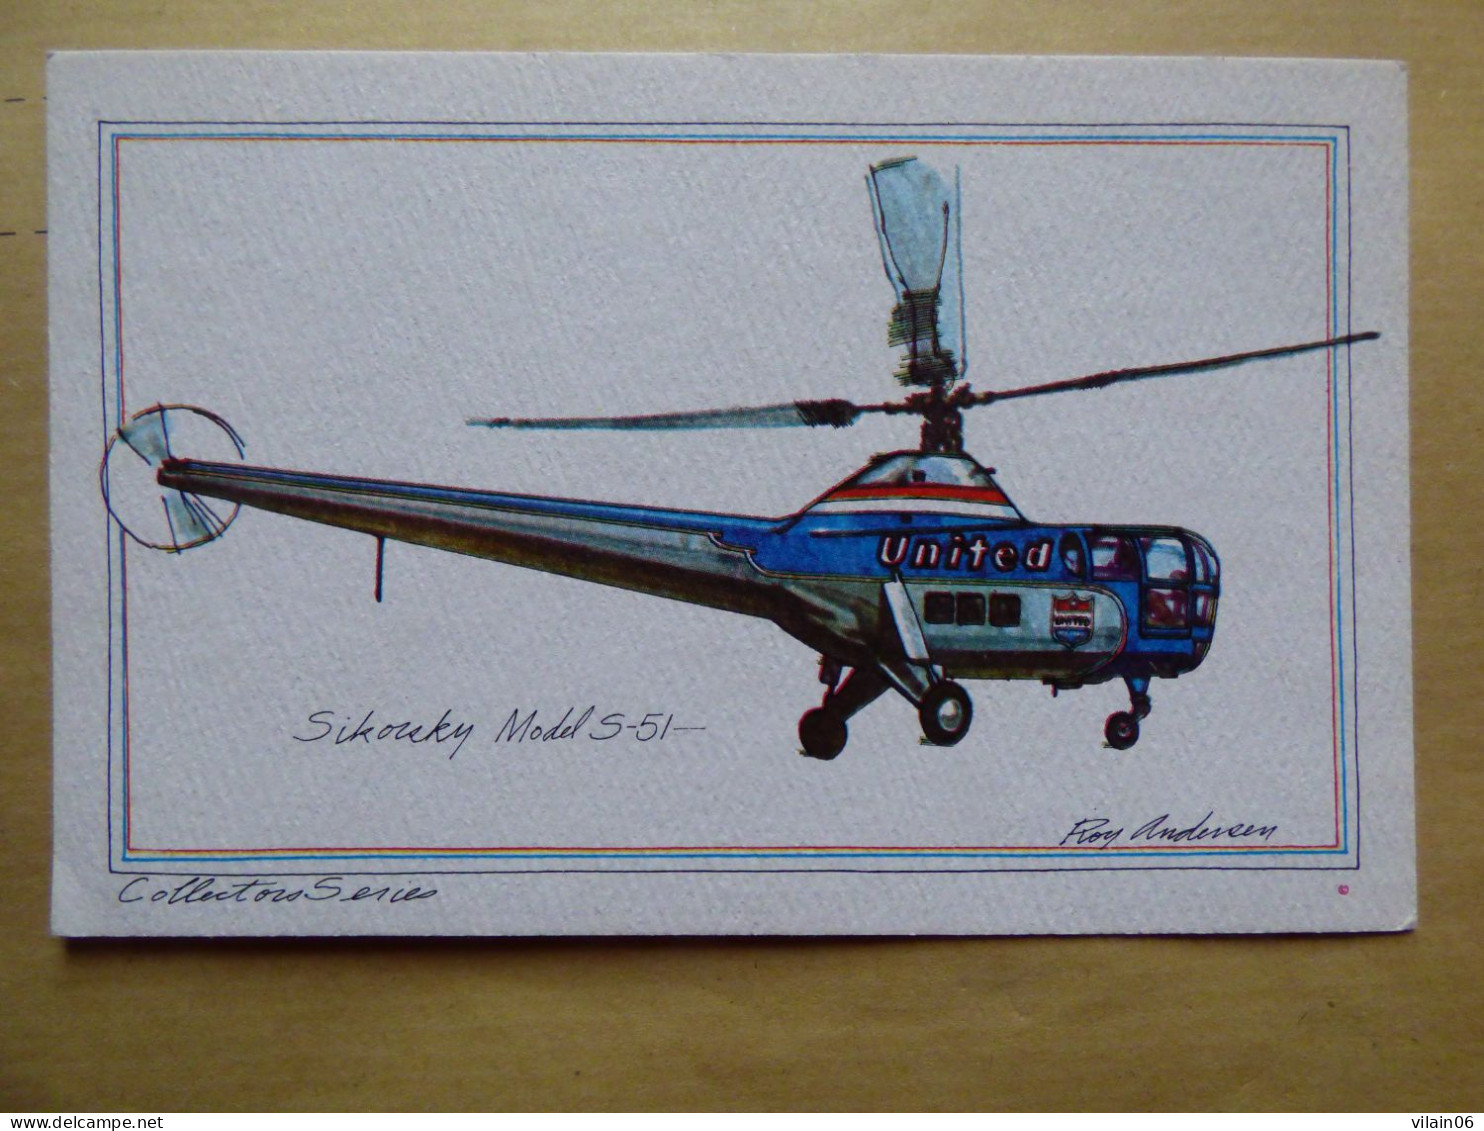 UNITED  SIKORSKY S-51  AIRLINES ISSUE / CARTE DE COMPAGNIE - Helicópteros